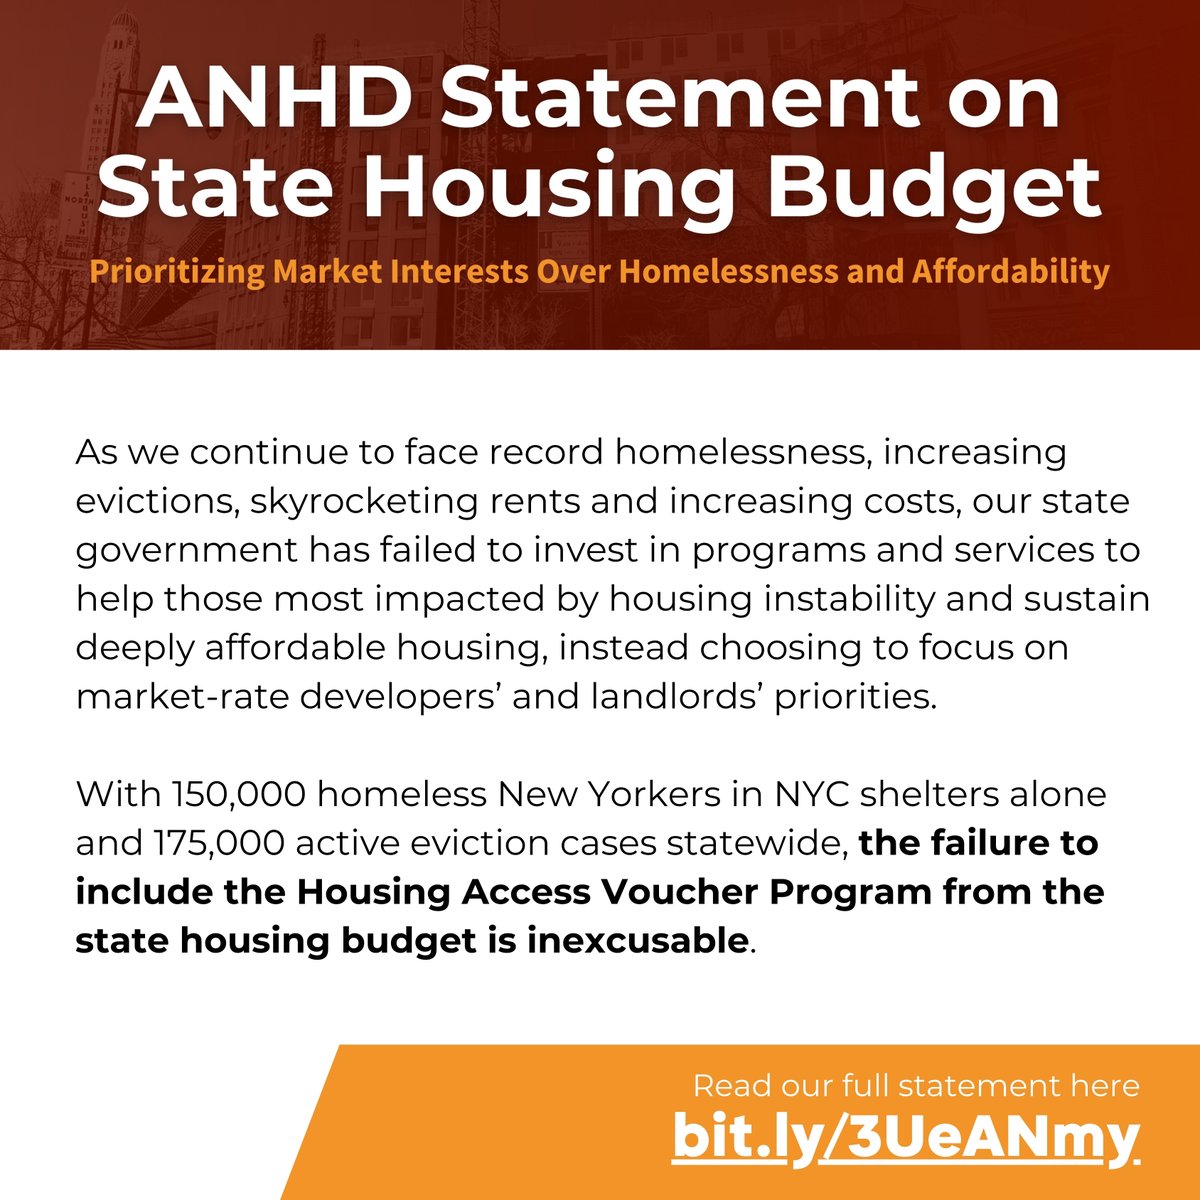 ANHD is disappointed that the state budget favors real estate interests over homelessness and affordability. Our full statement: anhd.org/press-release/… #AffordableHousing #Homelessness #StateBudget